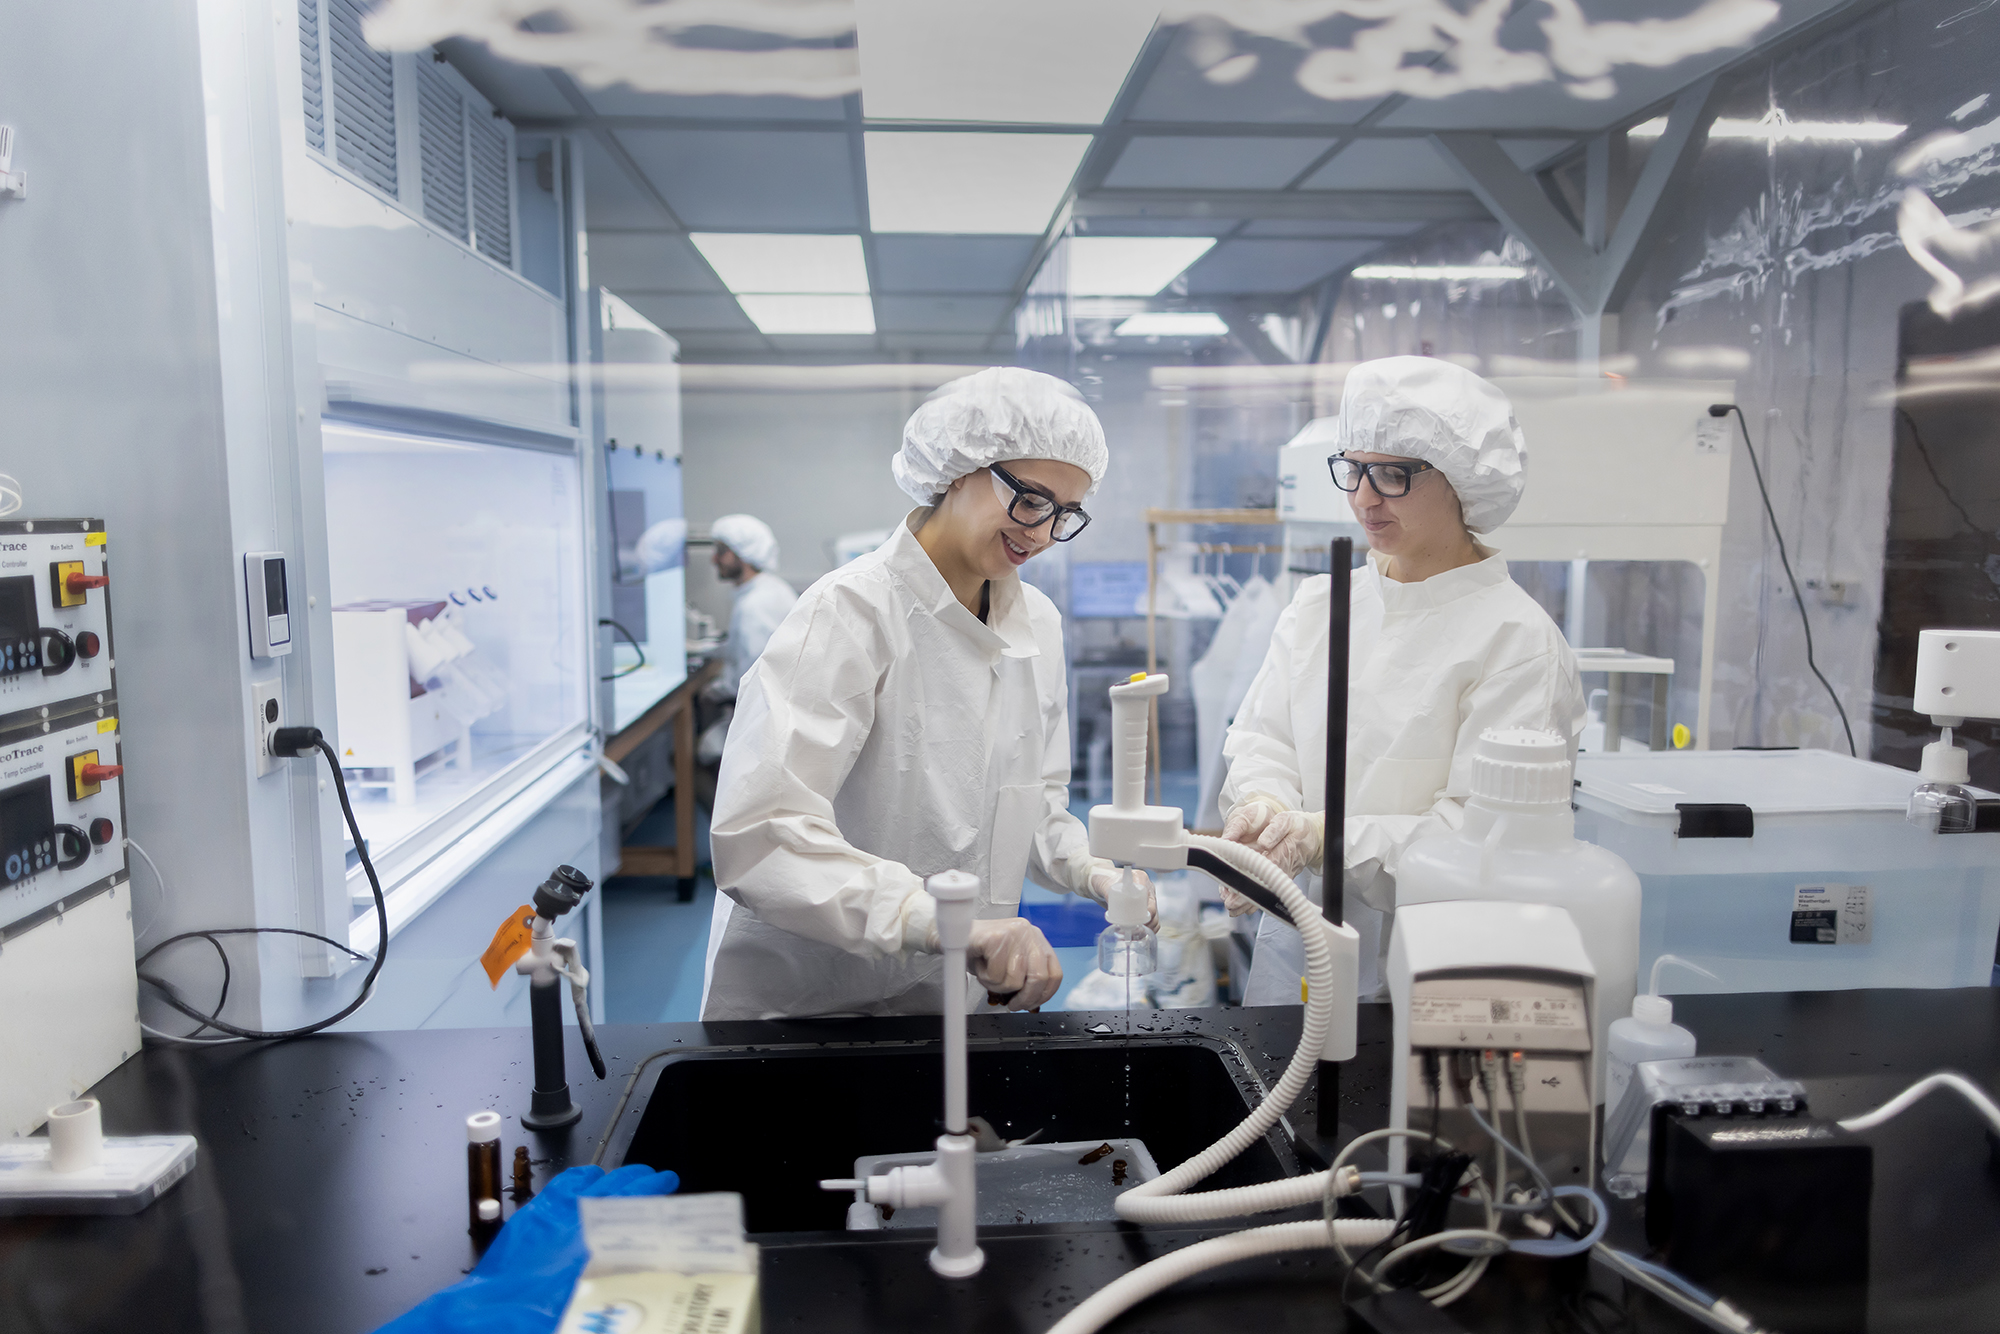 Two scientists in protective gown, cap, gloves, and glasses work in a lab cleaning equipment